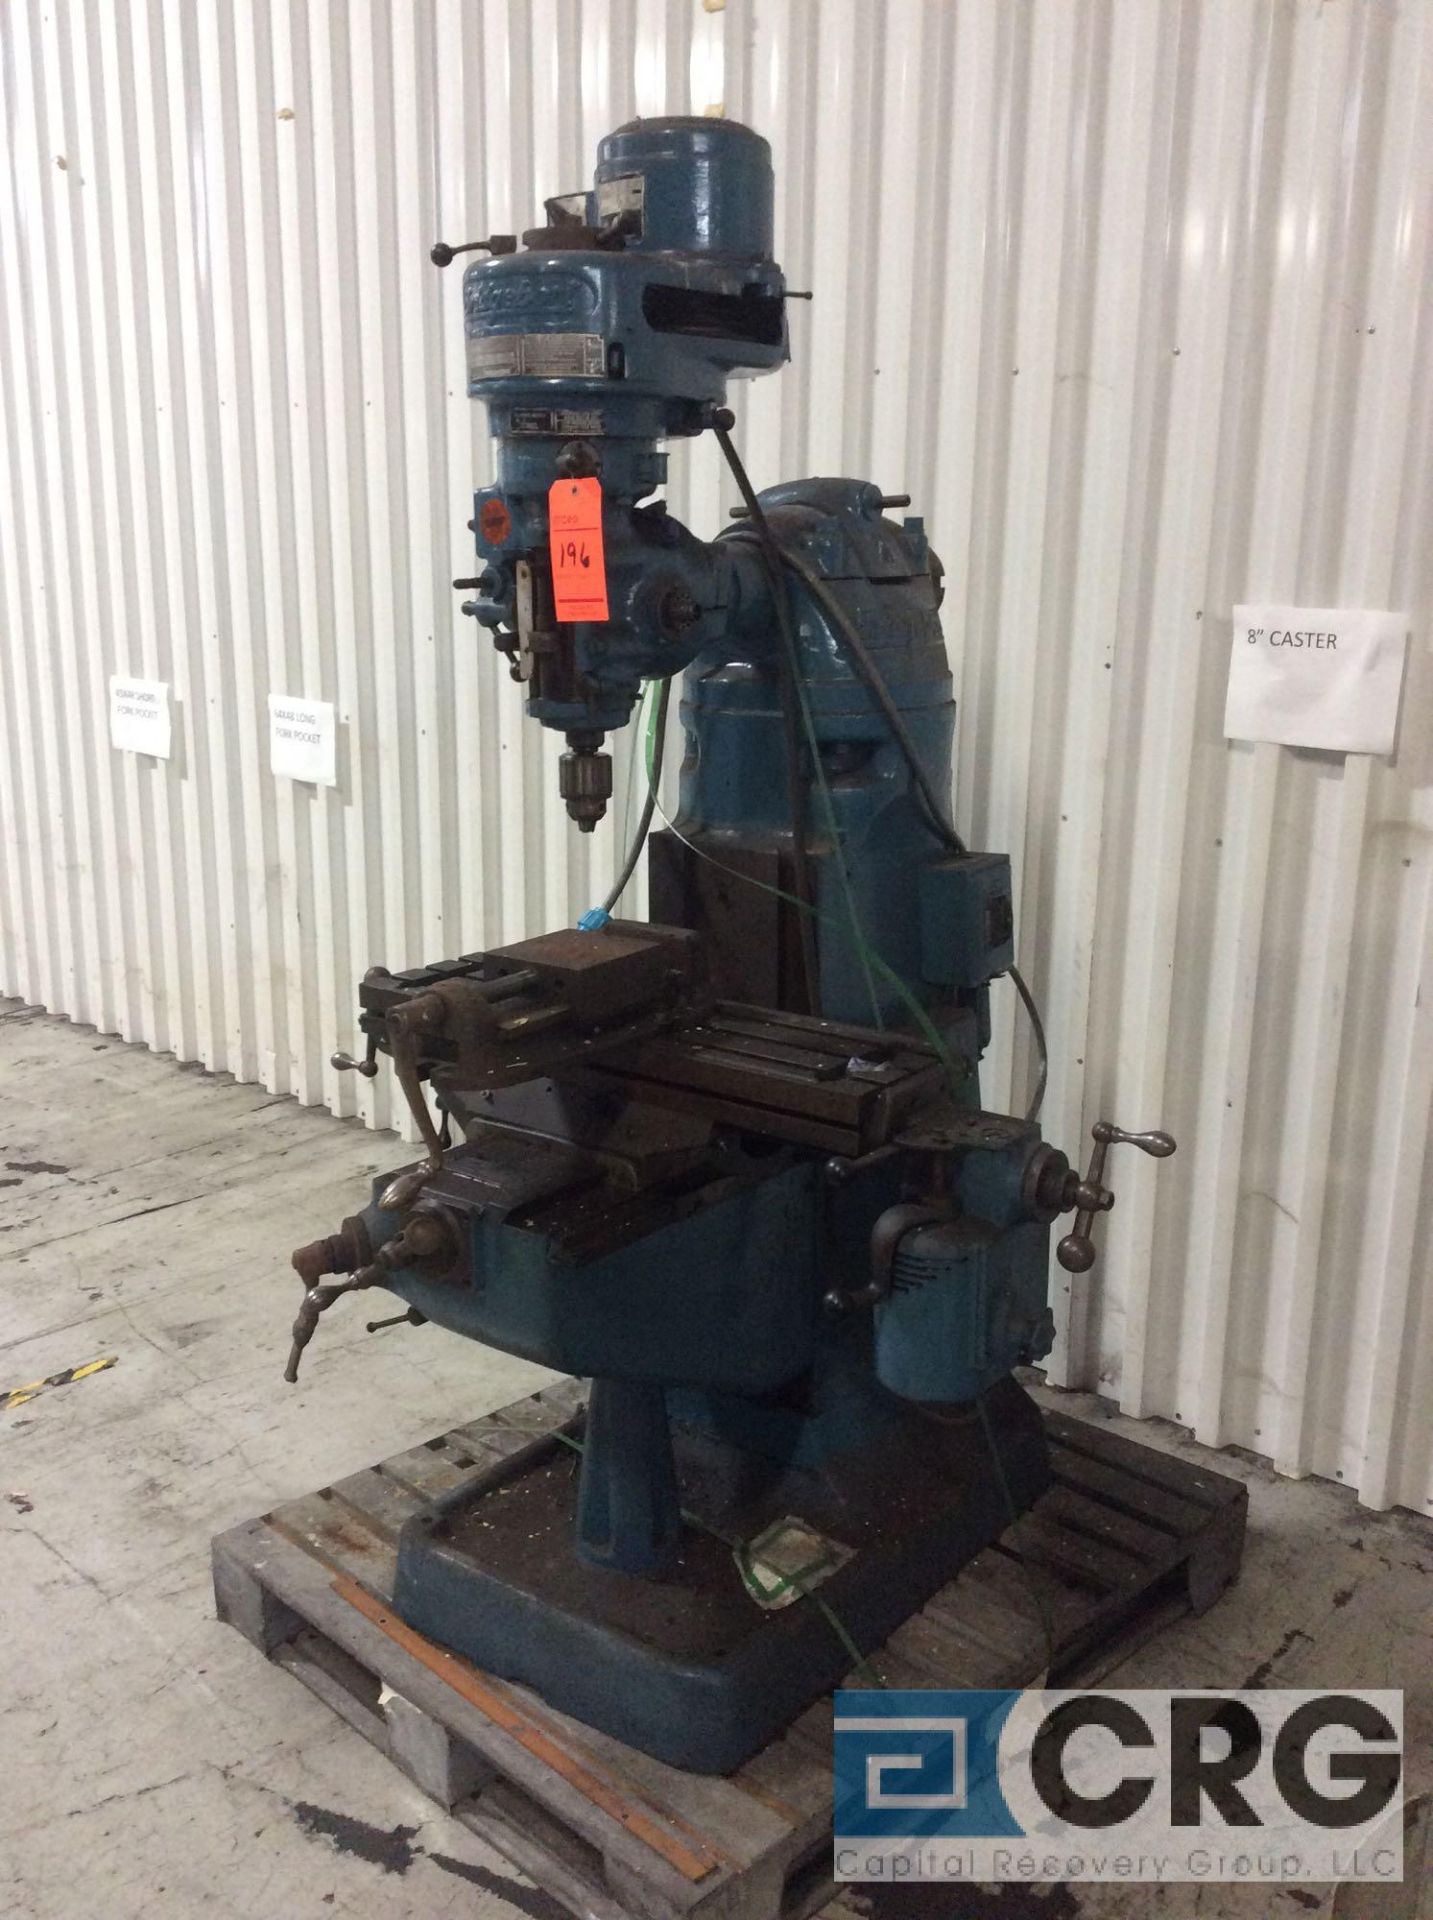 Bridgeport vertical milling machine, sn BR-34629, 1 hp, 3 phase, 80-2720 spindle speed, 9 X 32 - Image 2 of 6